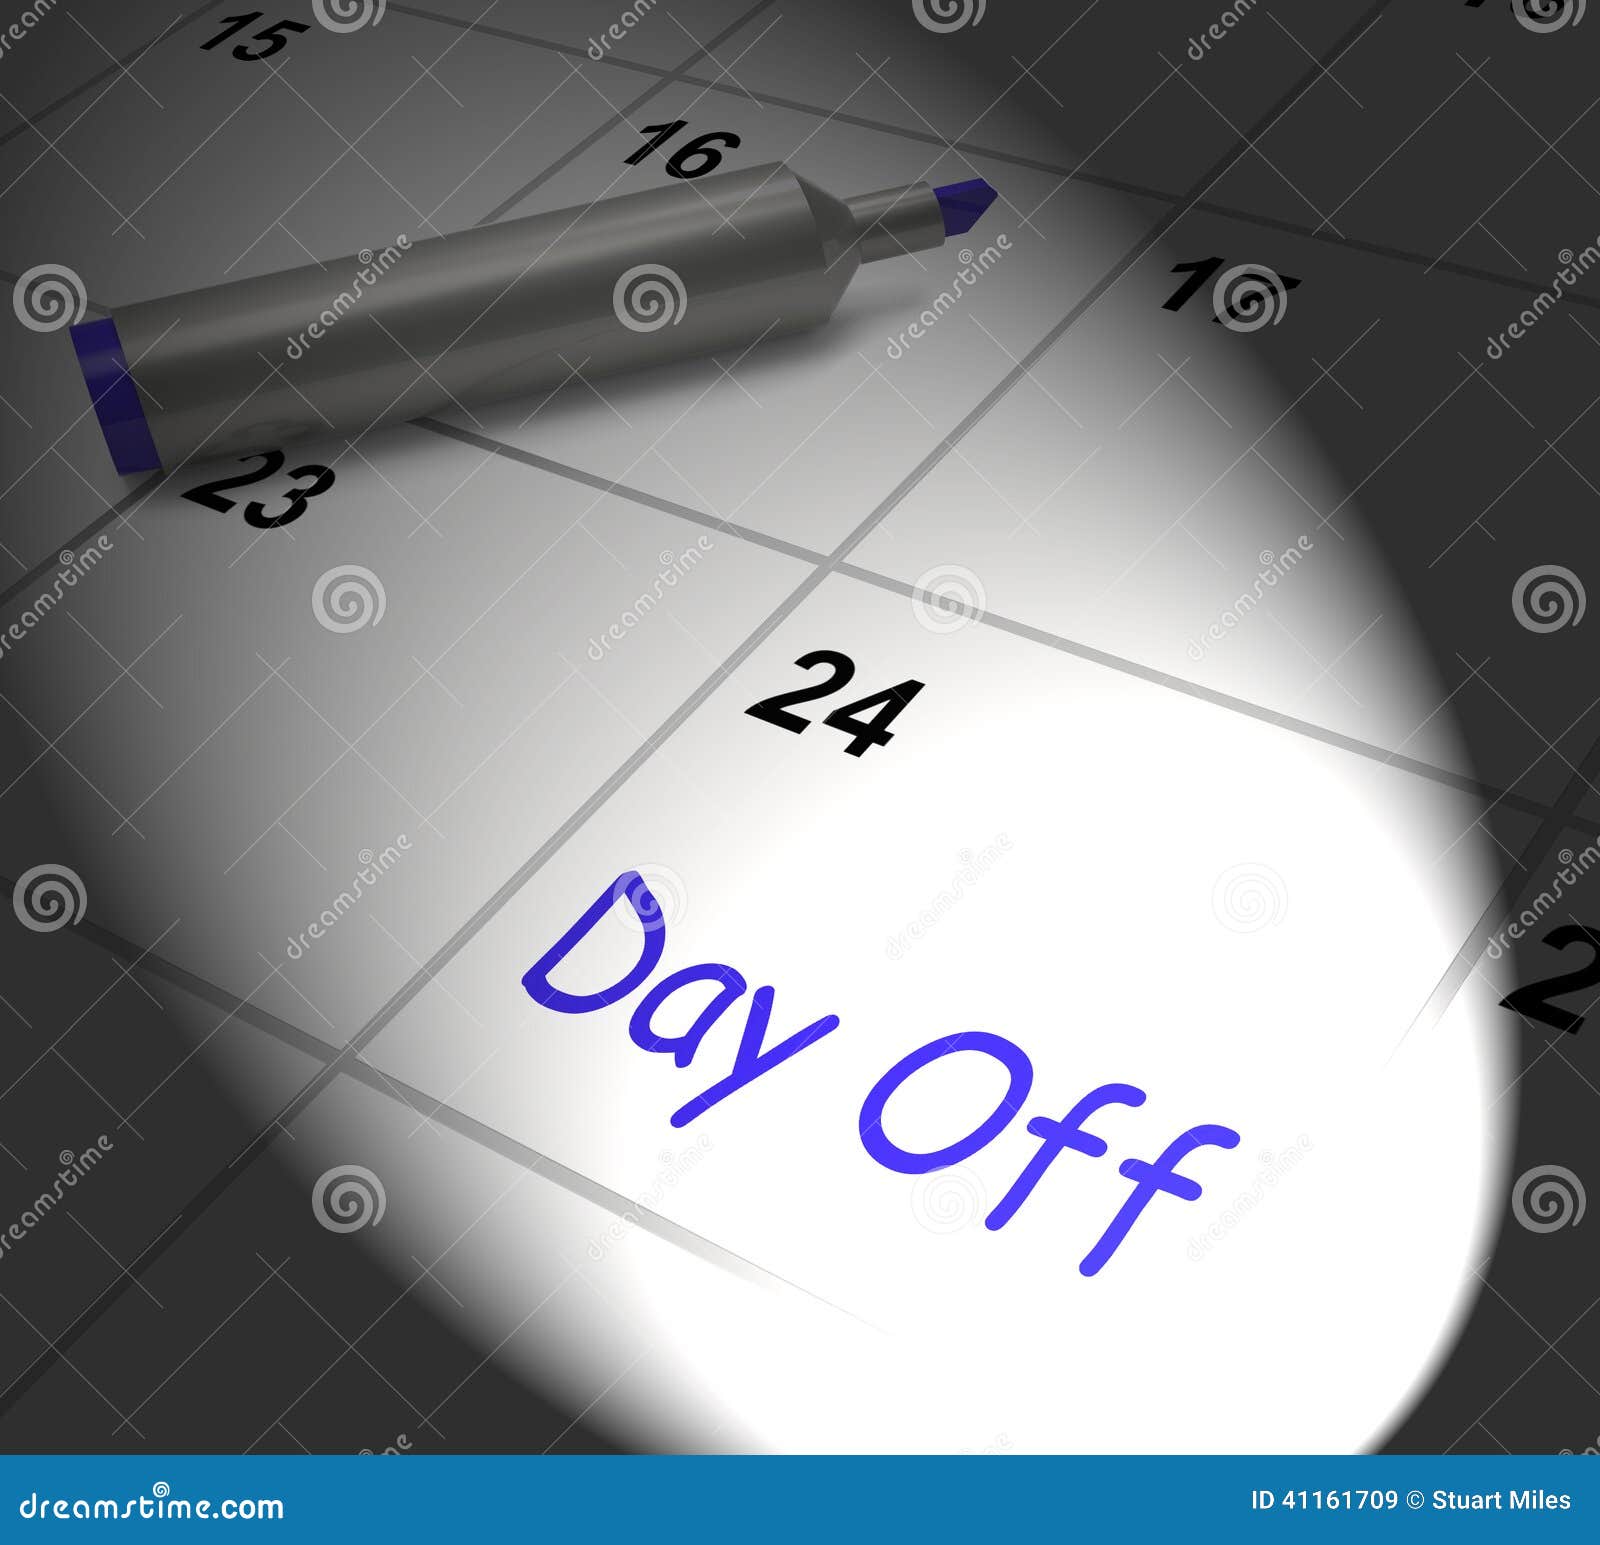 Day Off Calendar Displays Work Leave And Holiday Stock Illustration - Illustration of respite ...